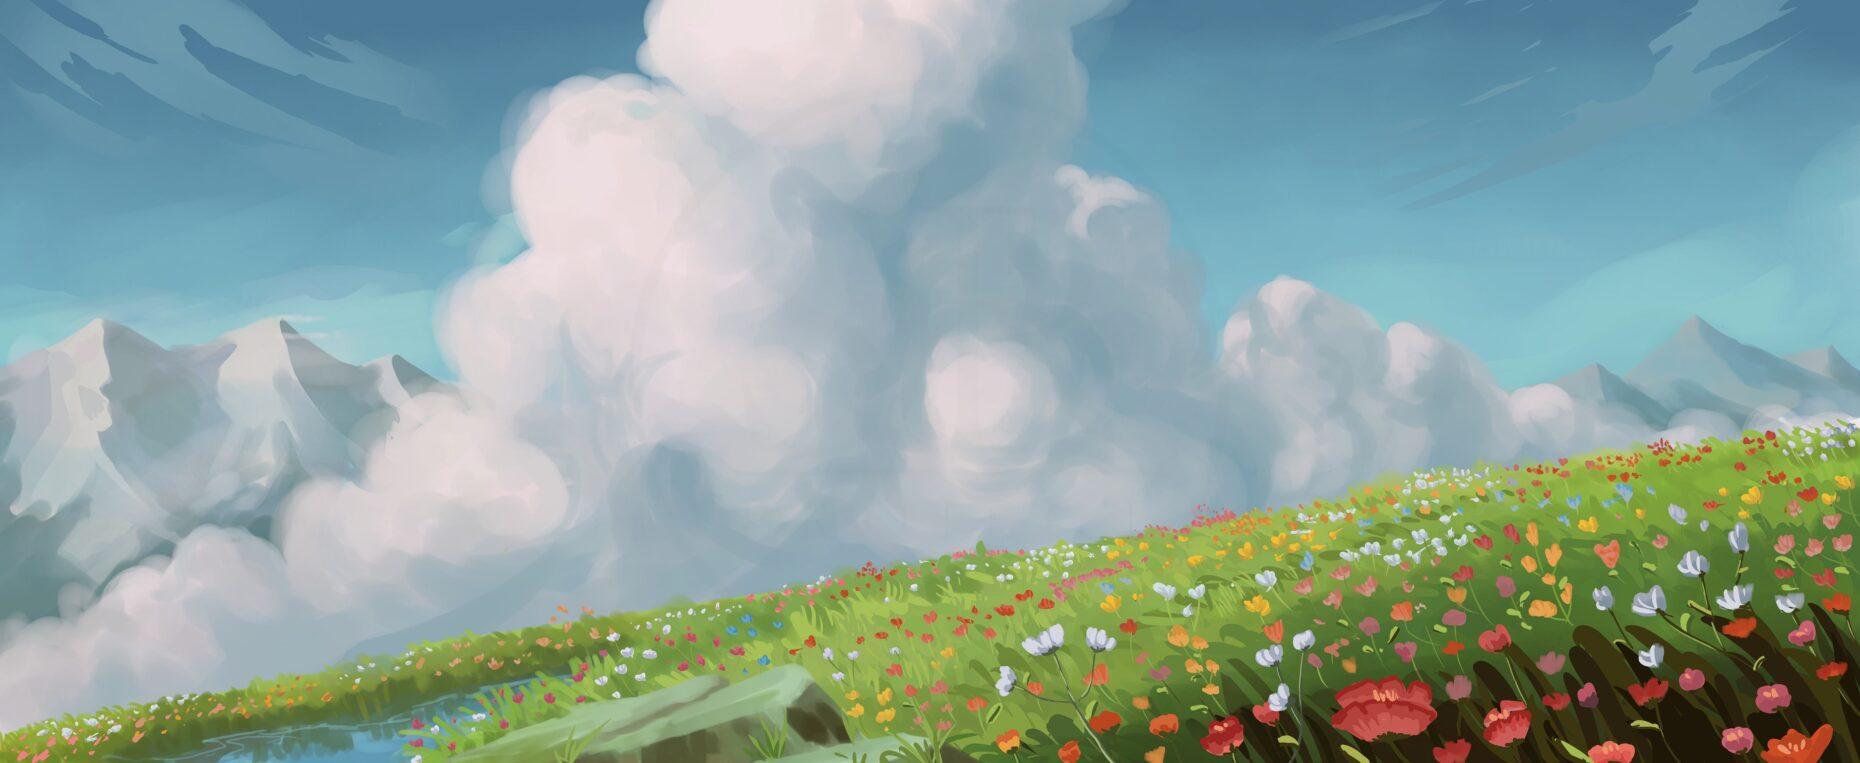 Howl's Moving Castle Background Remake by @wahangga